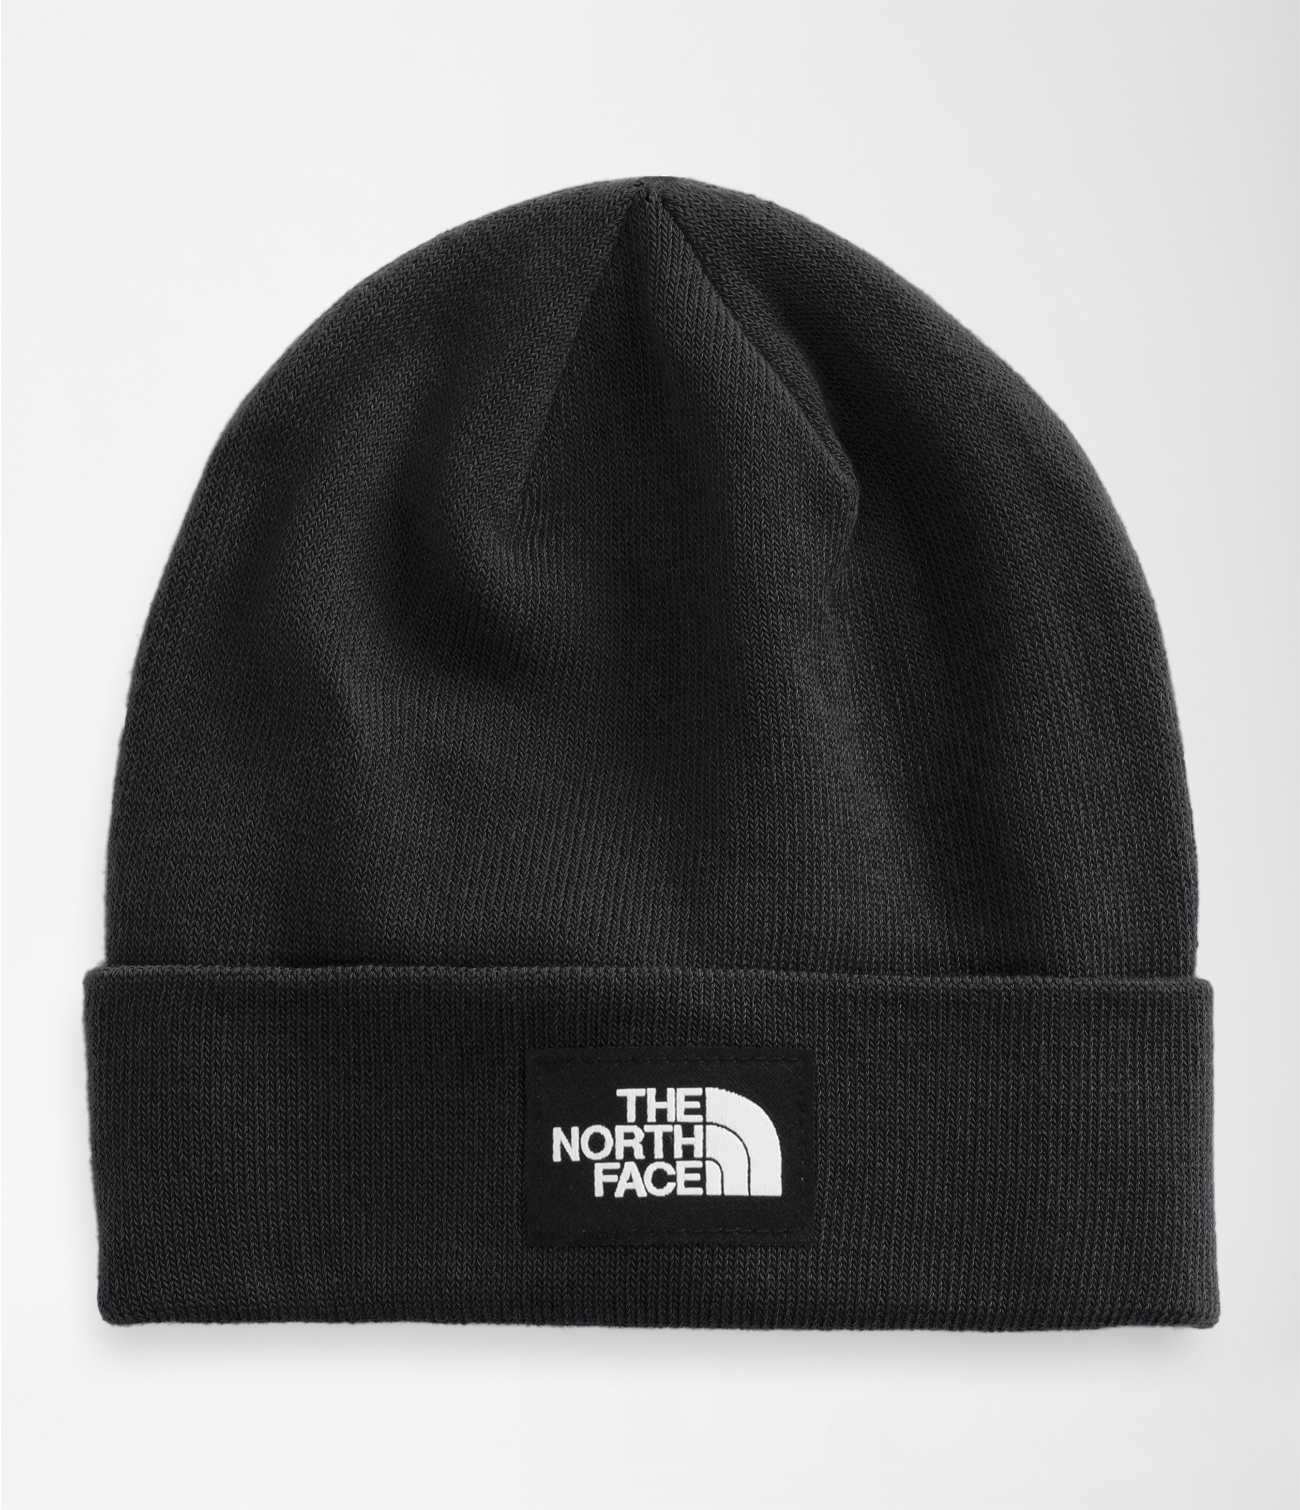 The North Face Renewed - DOCK WORKER RECYCLED BEANIE